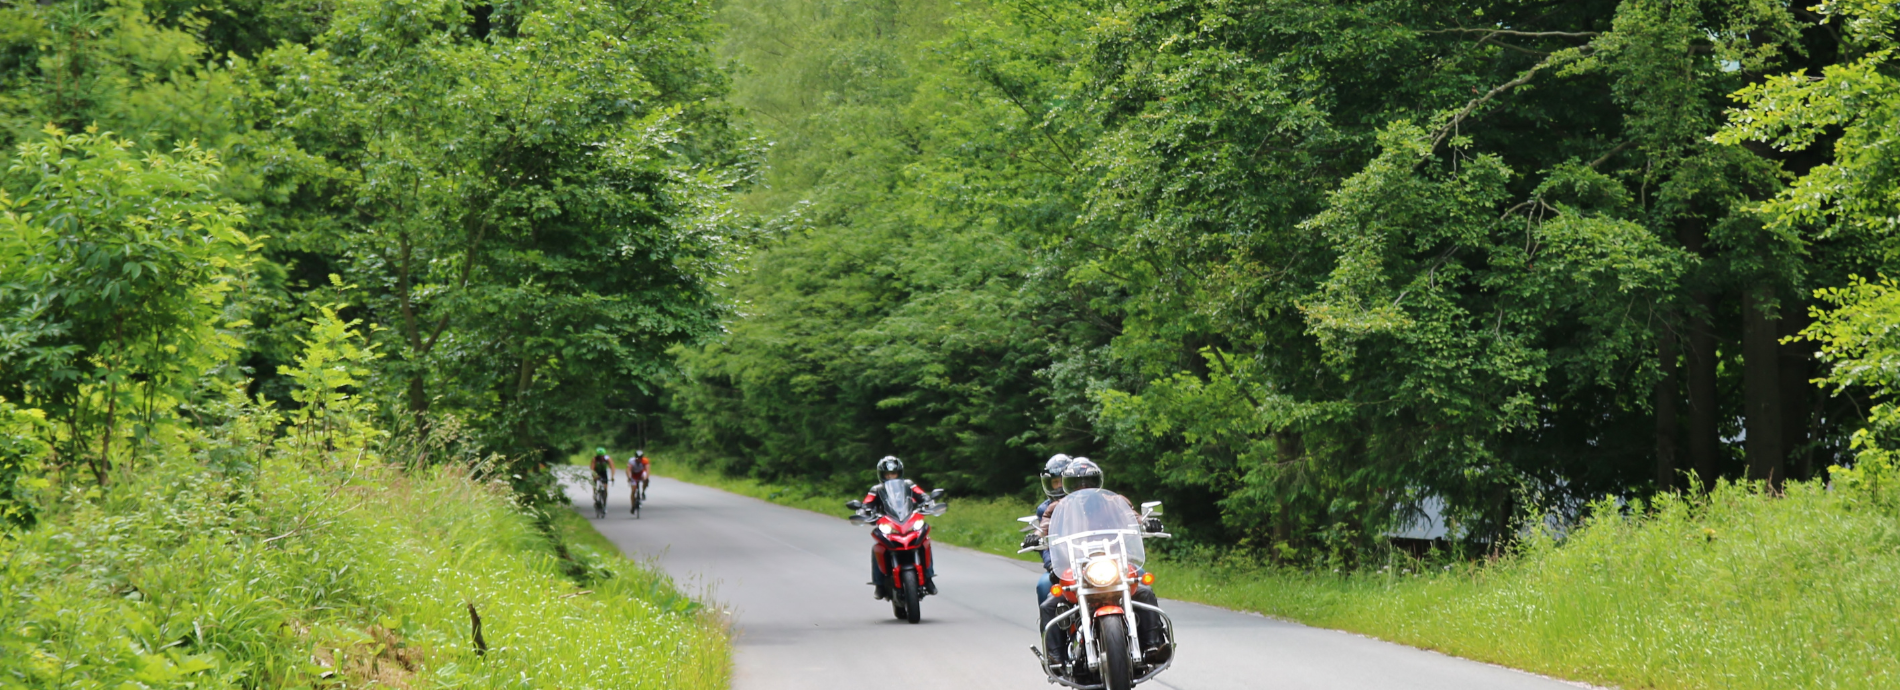 motorcycles and cyclists on a rural road